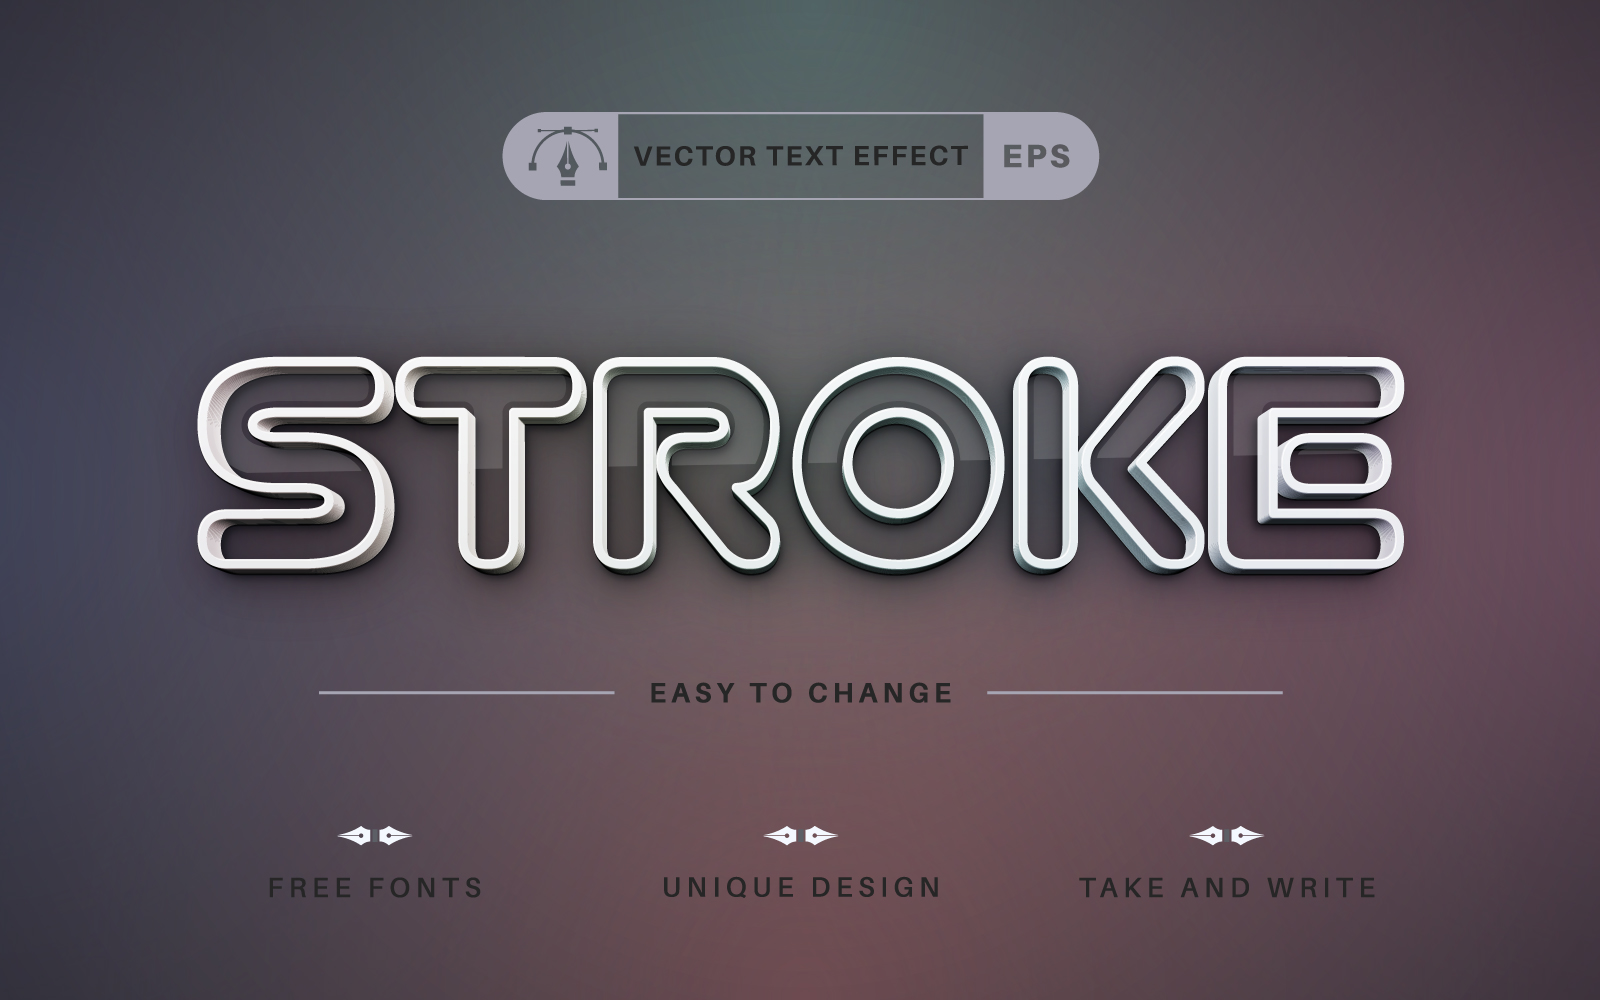 White Stroke - Editable Text Effect, Font Style